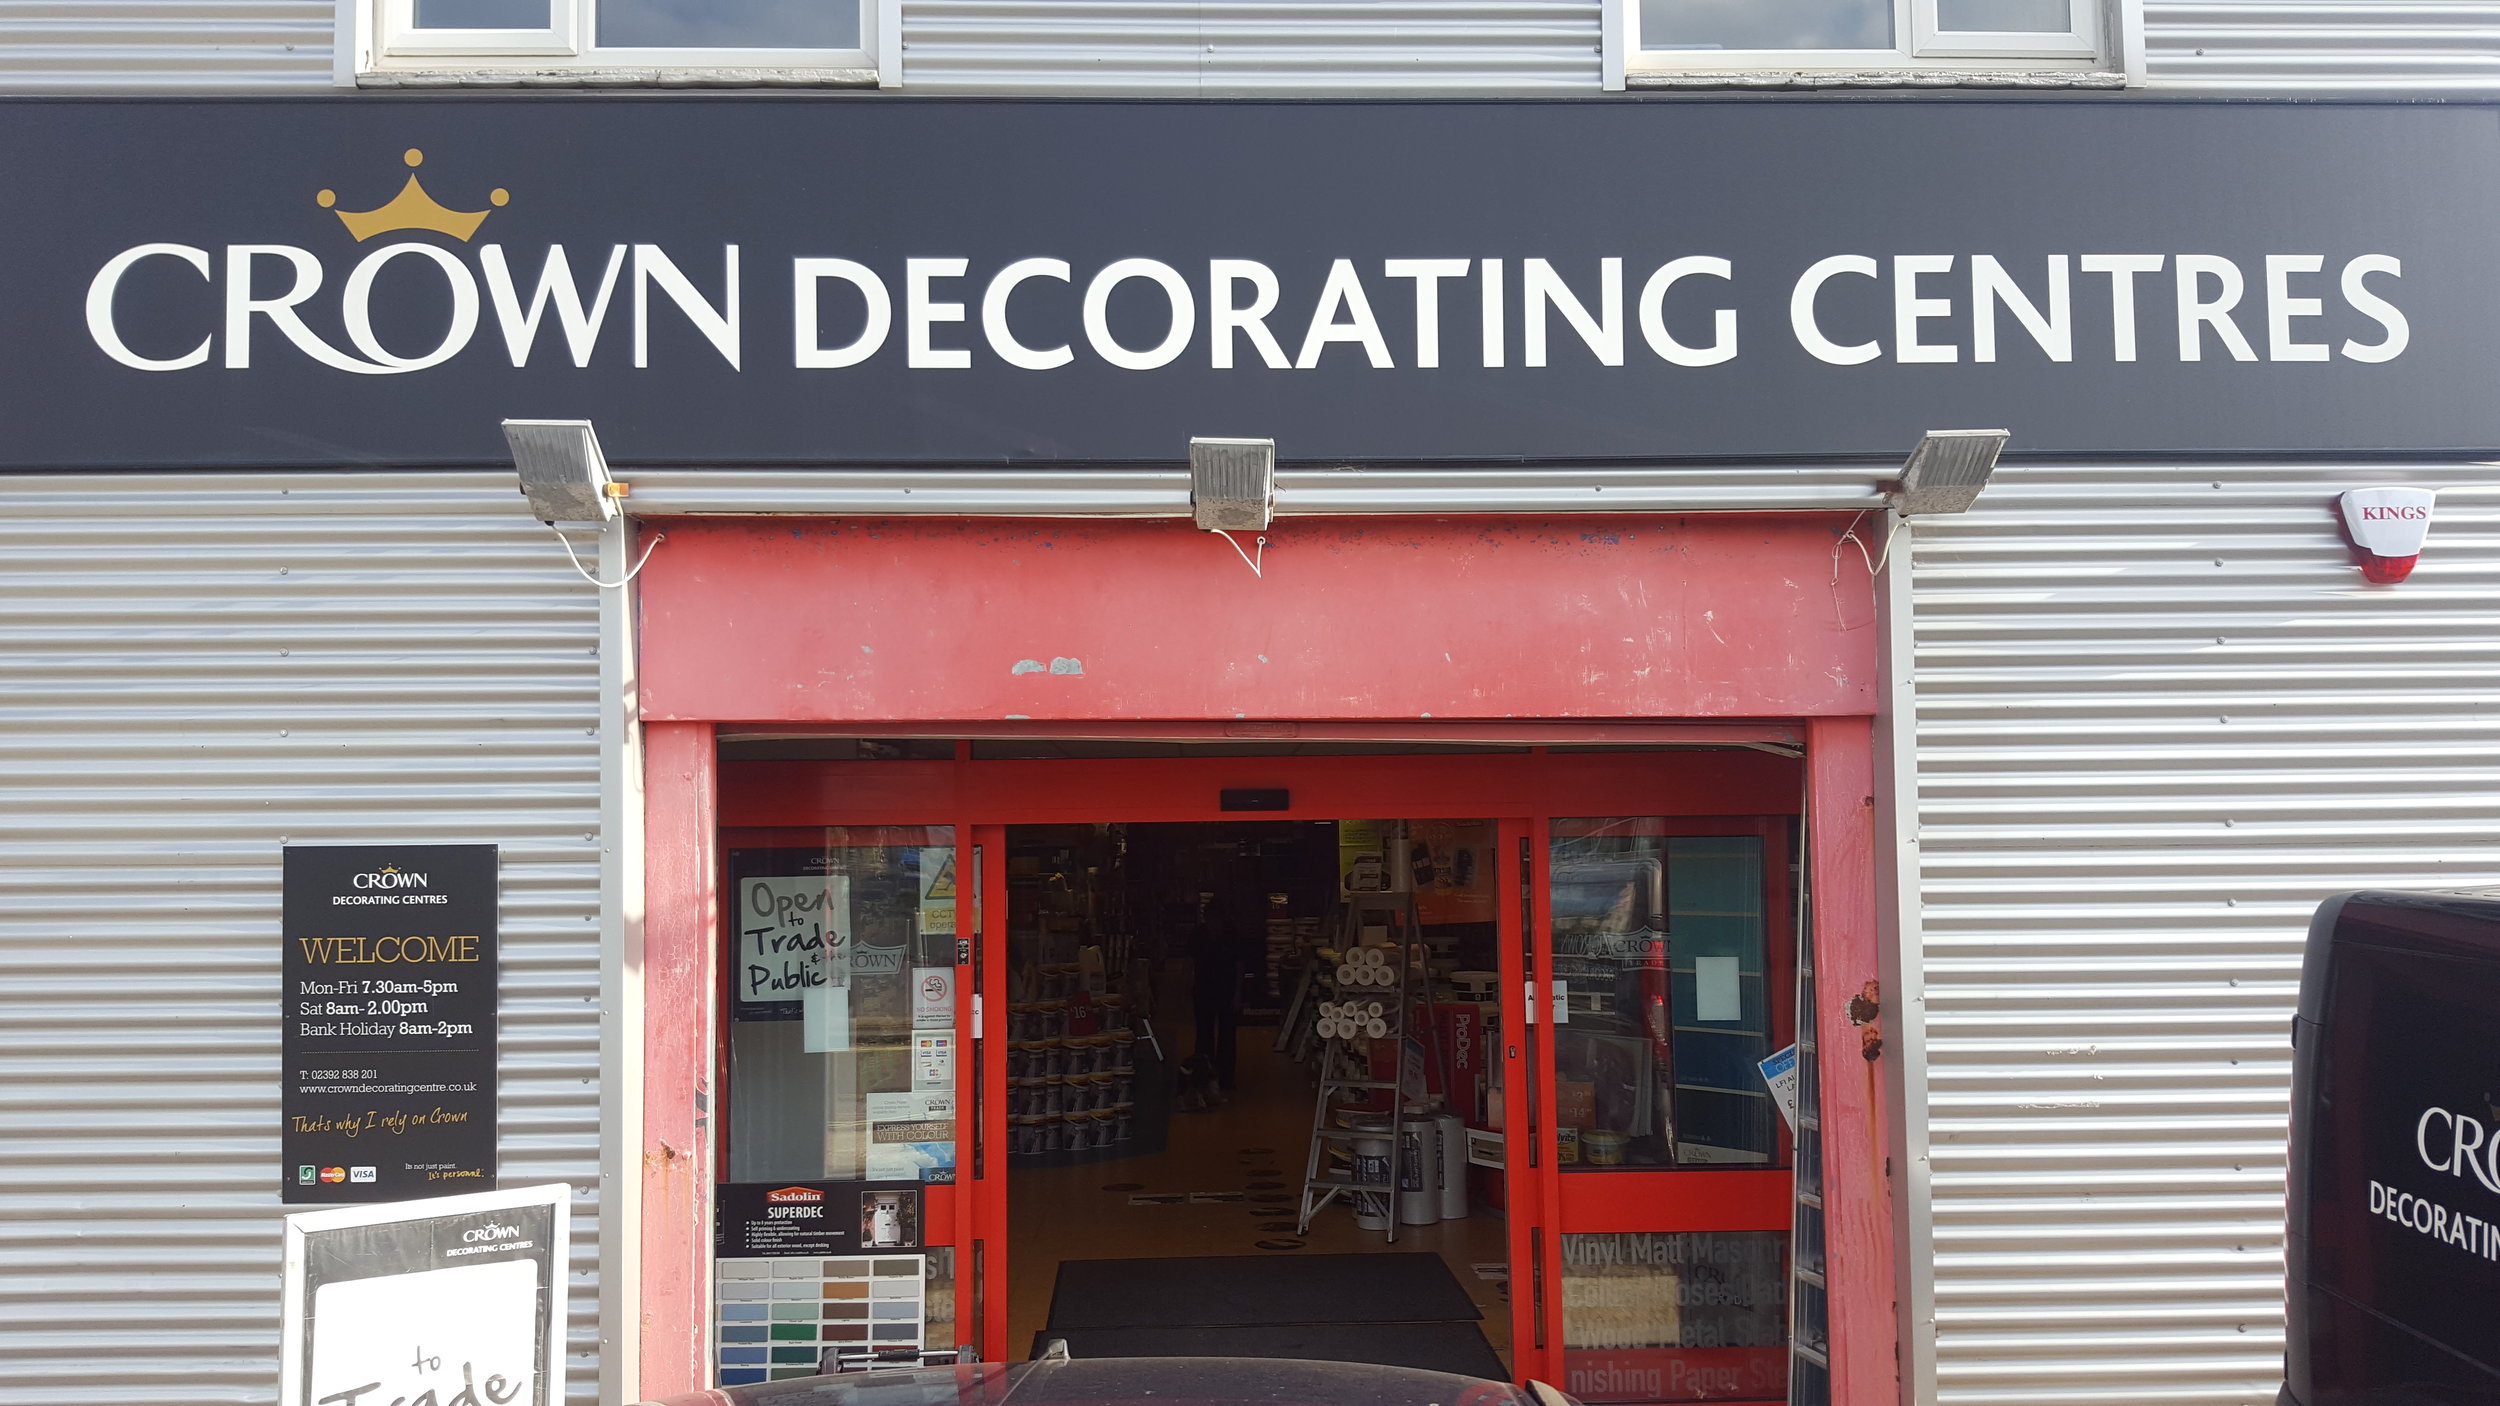 Crown Decorating Centre - Walsall – WS2 8EJ, Walsall, 1 Day St –  Construction Company Phone Number, Photos – Nicelocal